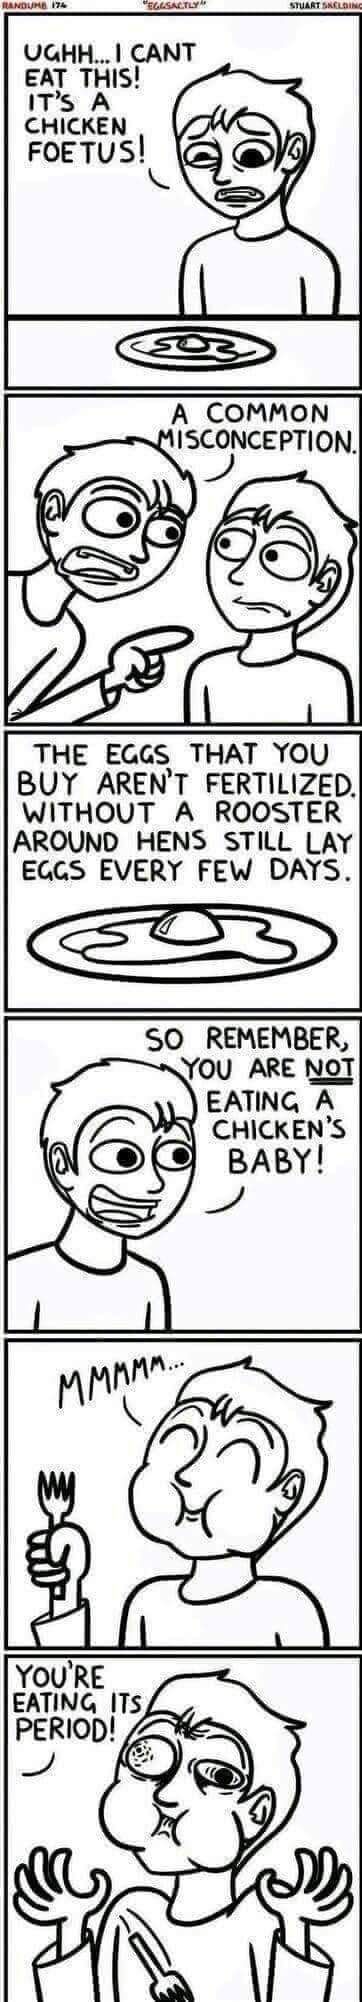 Won't see the eggs the same way as I used to before